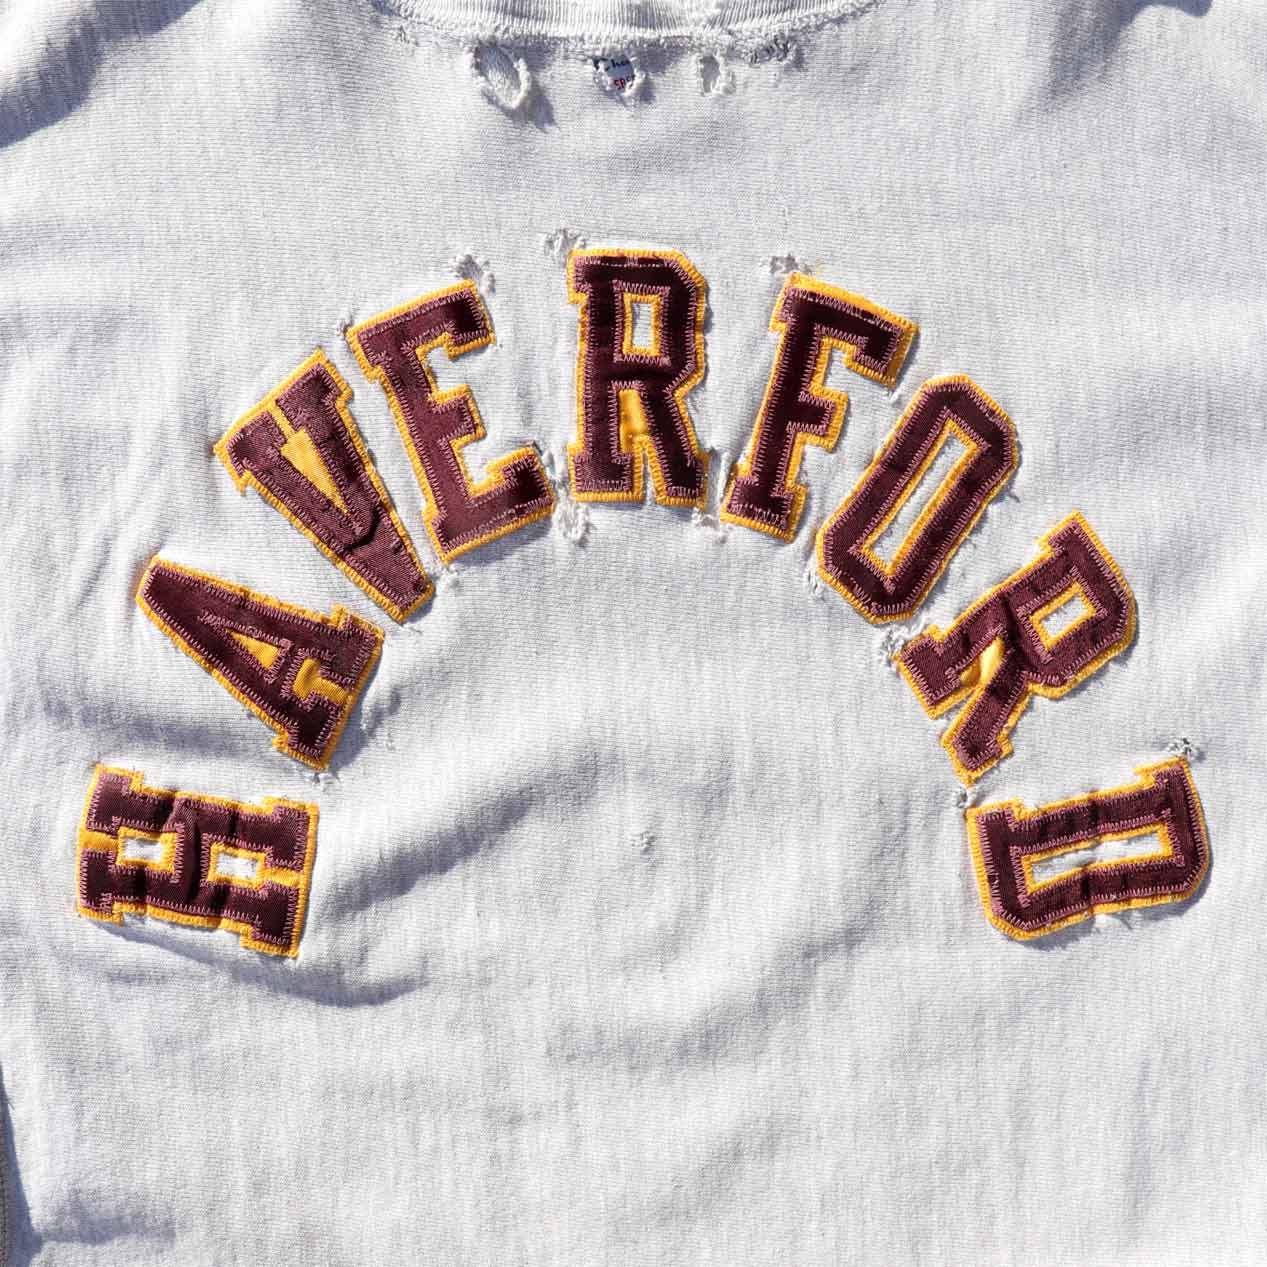 POST JUNK / 90's CHAMPION “HAVERFORD” Damaged Reverse Weave Made 